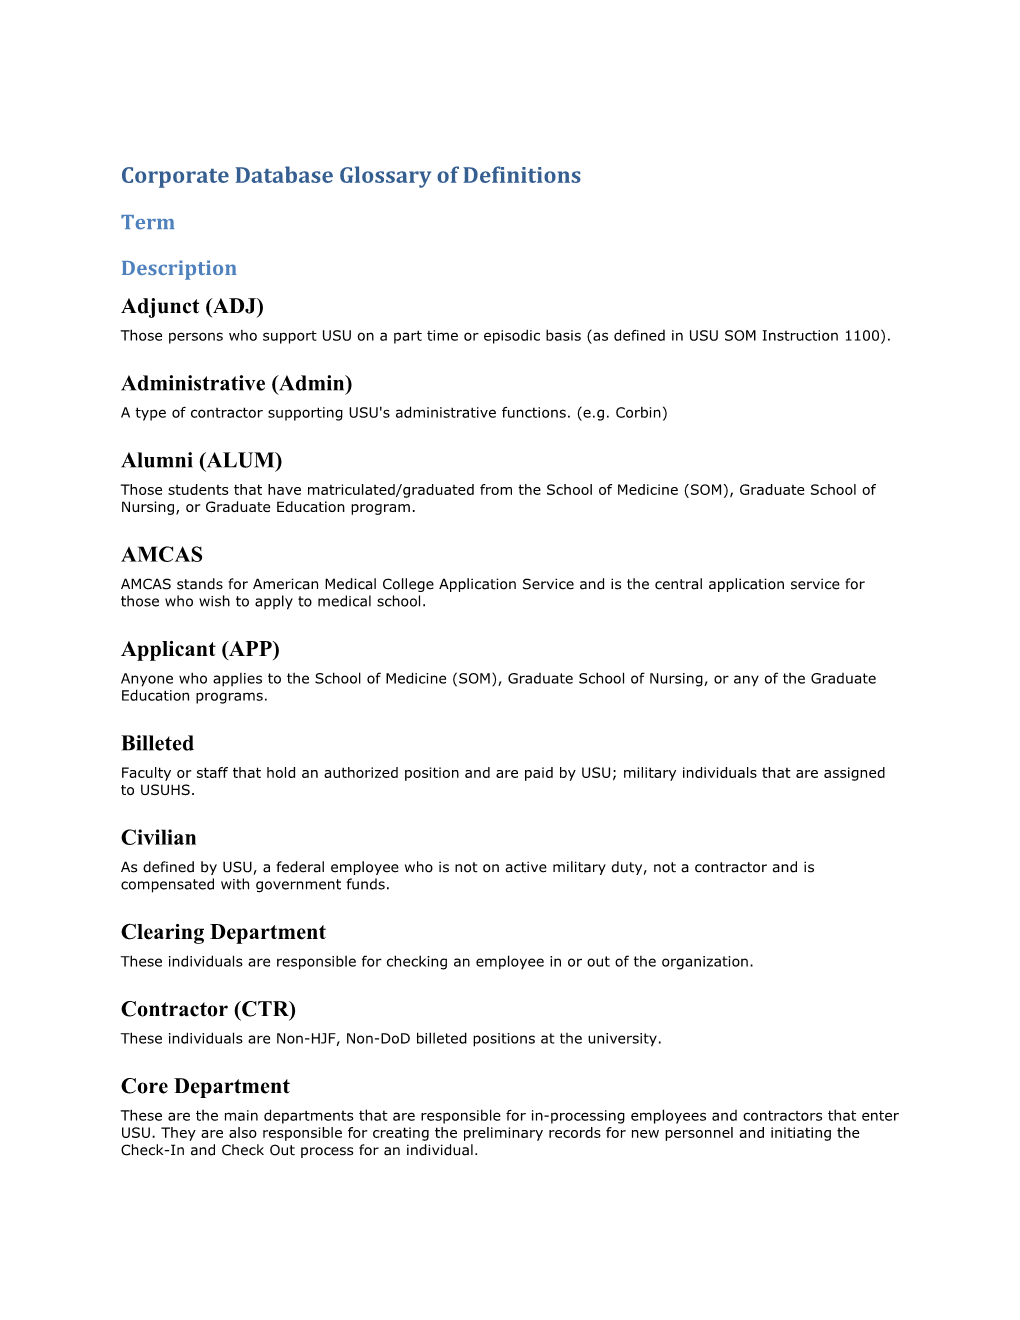 Corporate Database Glossary of Definitions